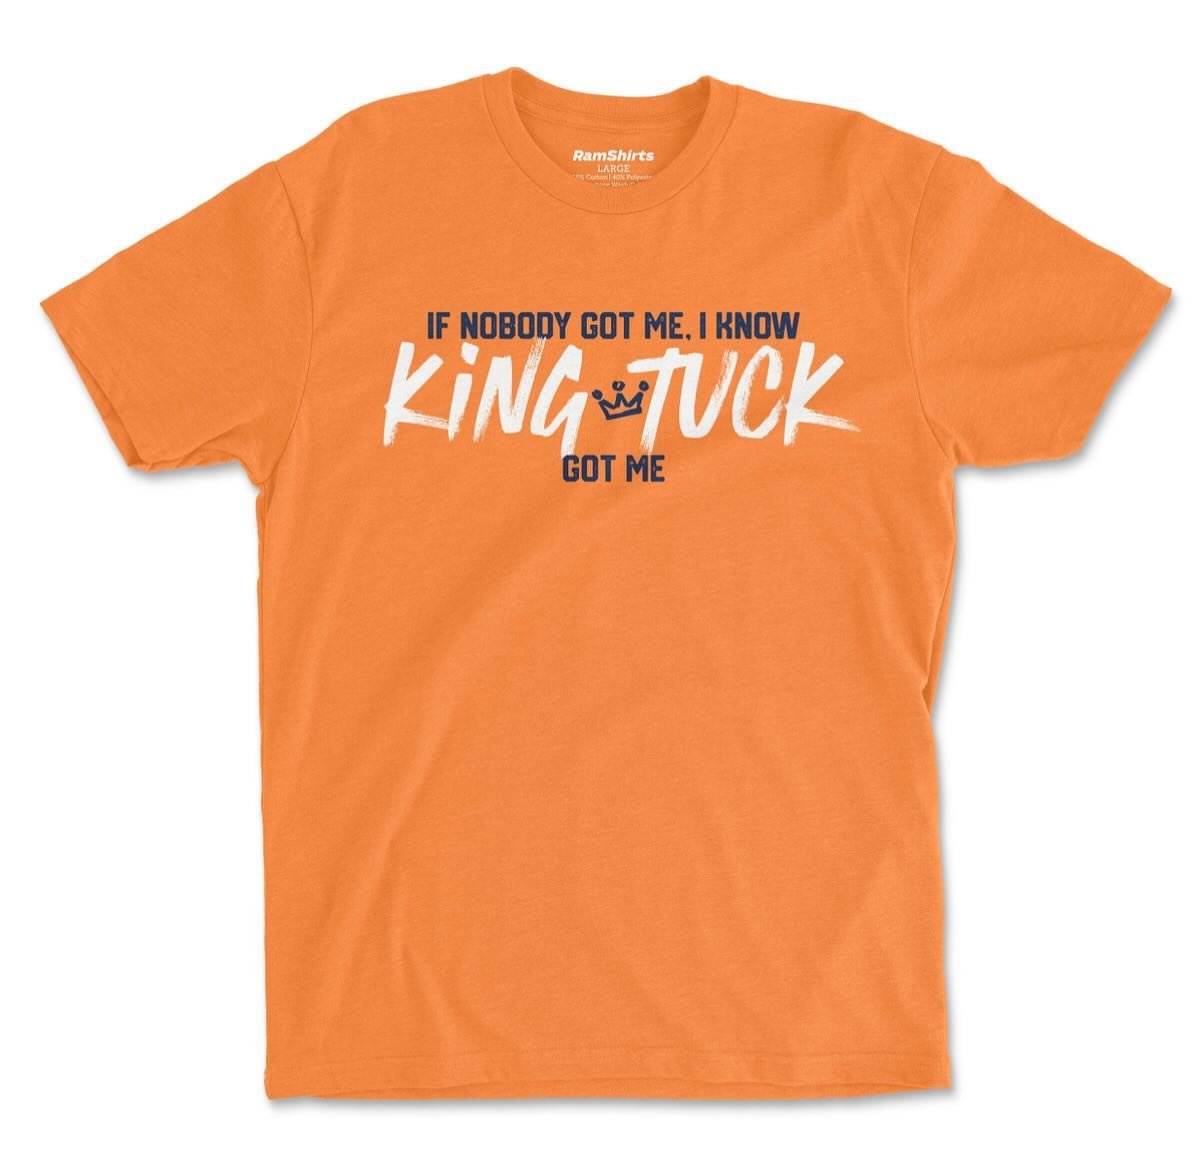 👑 King Tuck had himself a day with two home runs, we happen to have two different Tucker designs for you. Grab one or both today! Support small business, shop small!